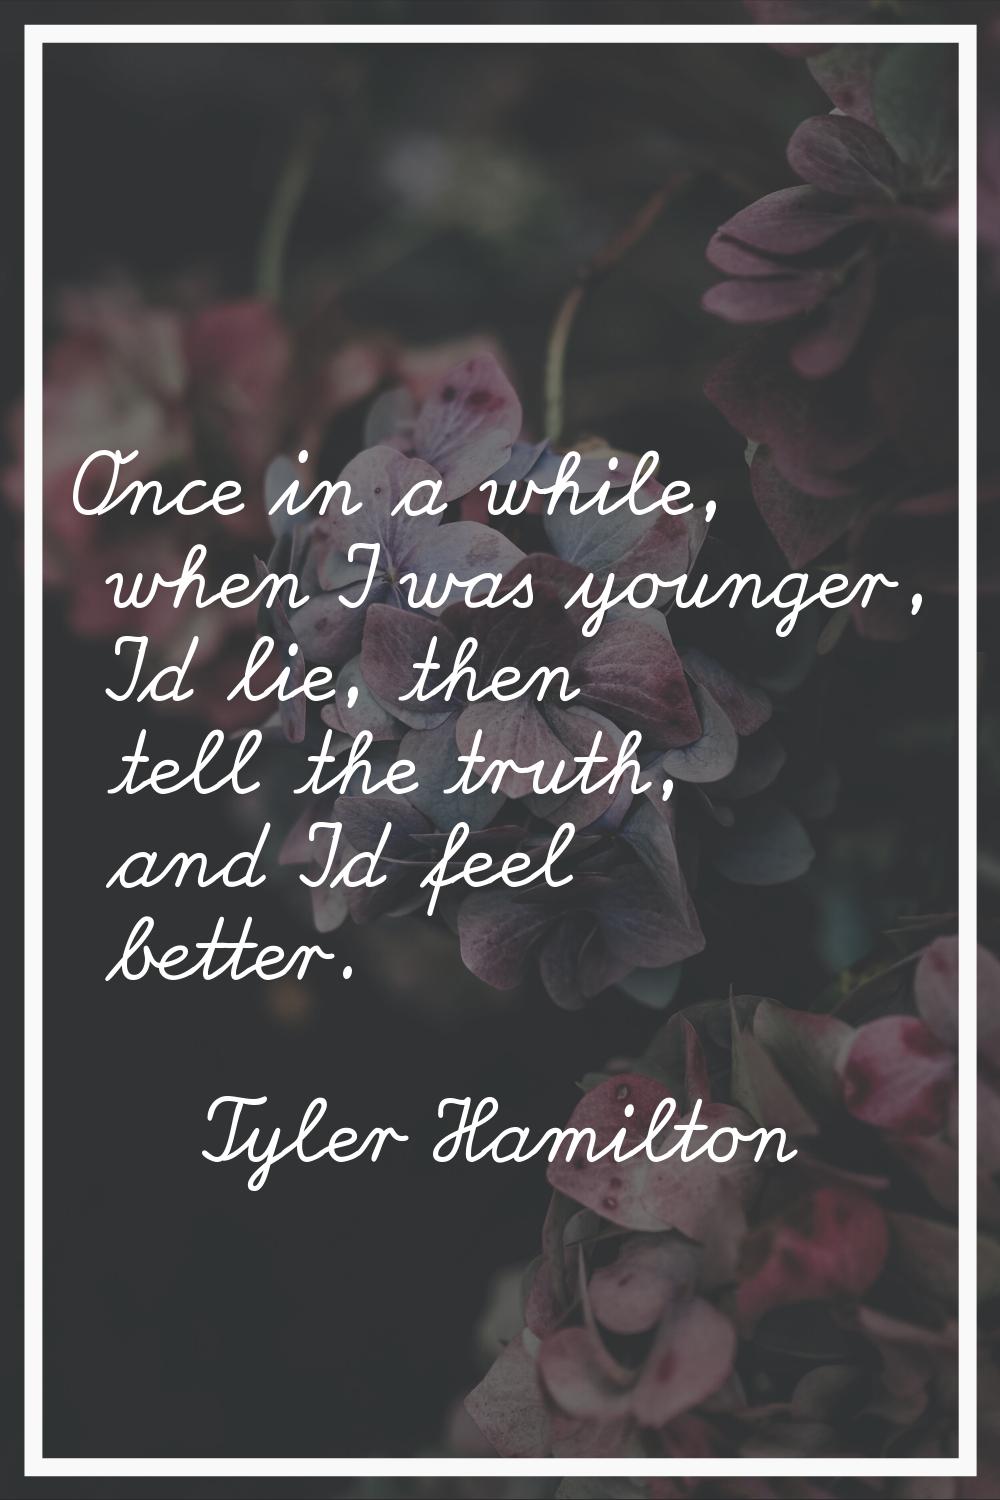 Once in a while, when I was younger, I'd lie, then tell the truth, and I'd feel better.